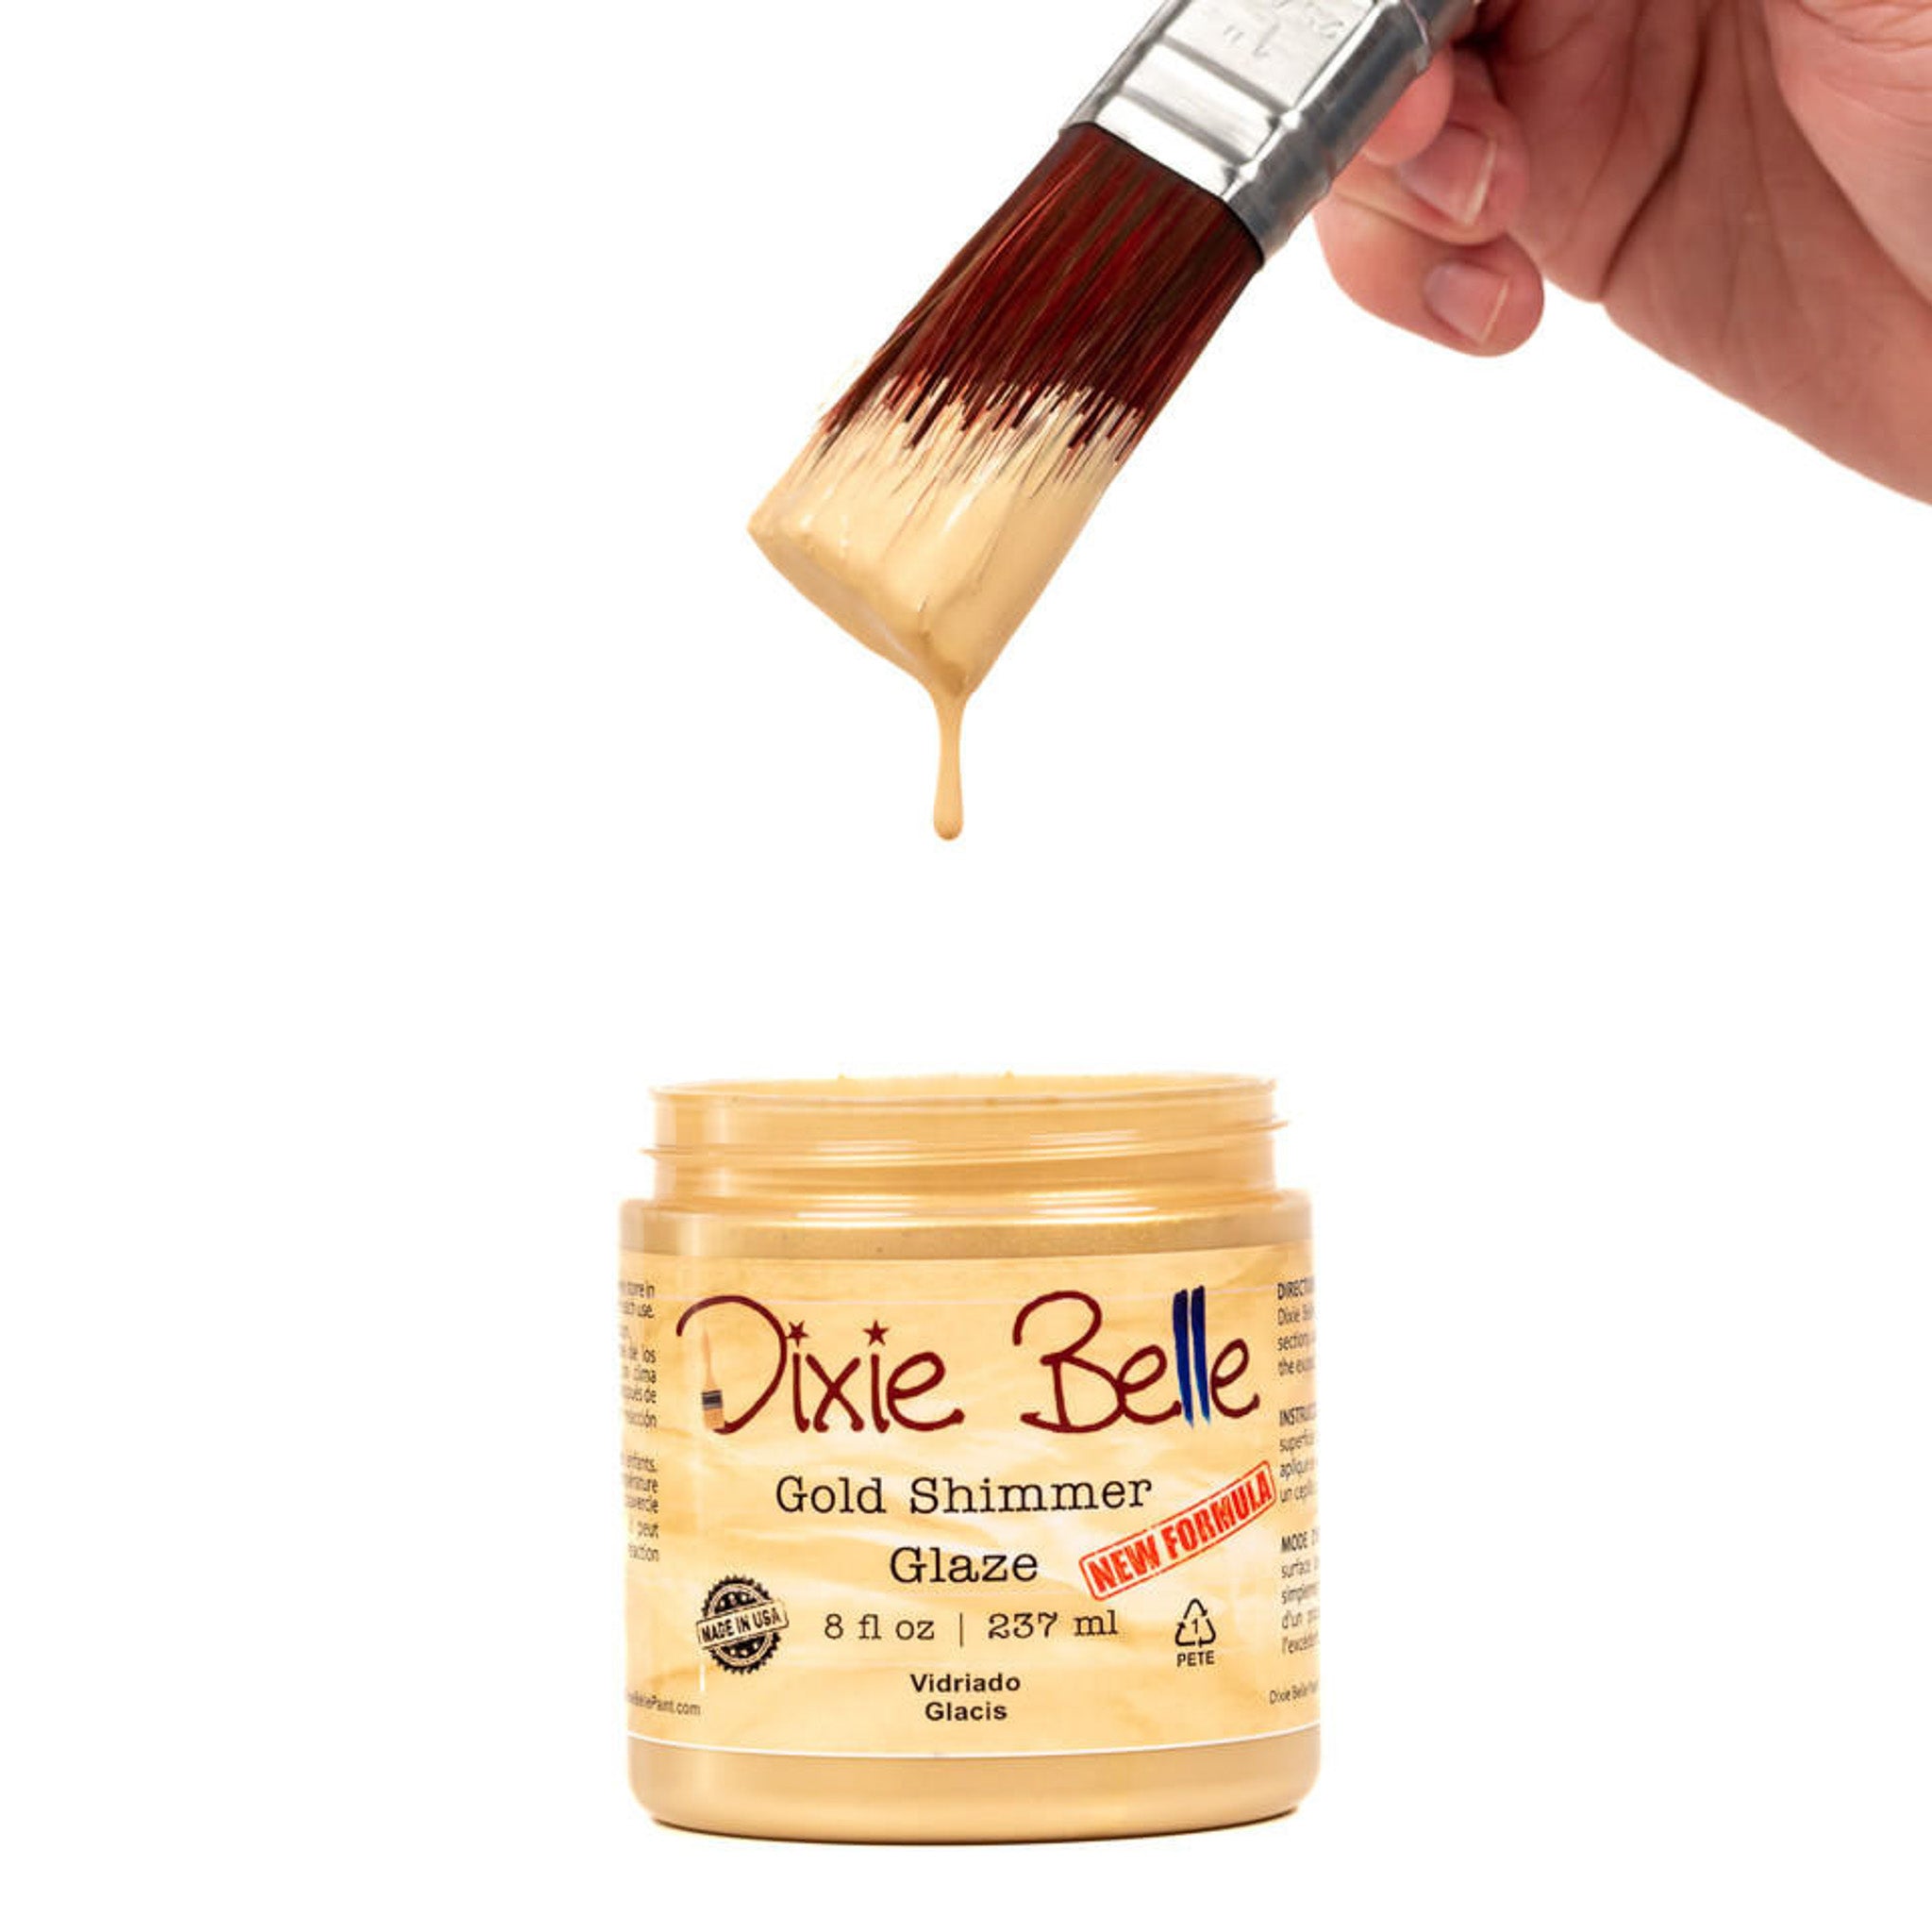 An open container of an 8oz/237ml Dixie Belle Gold Shimmer Glaze with a dripping paintbrush above it is against a white background.